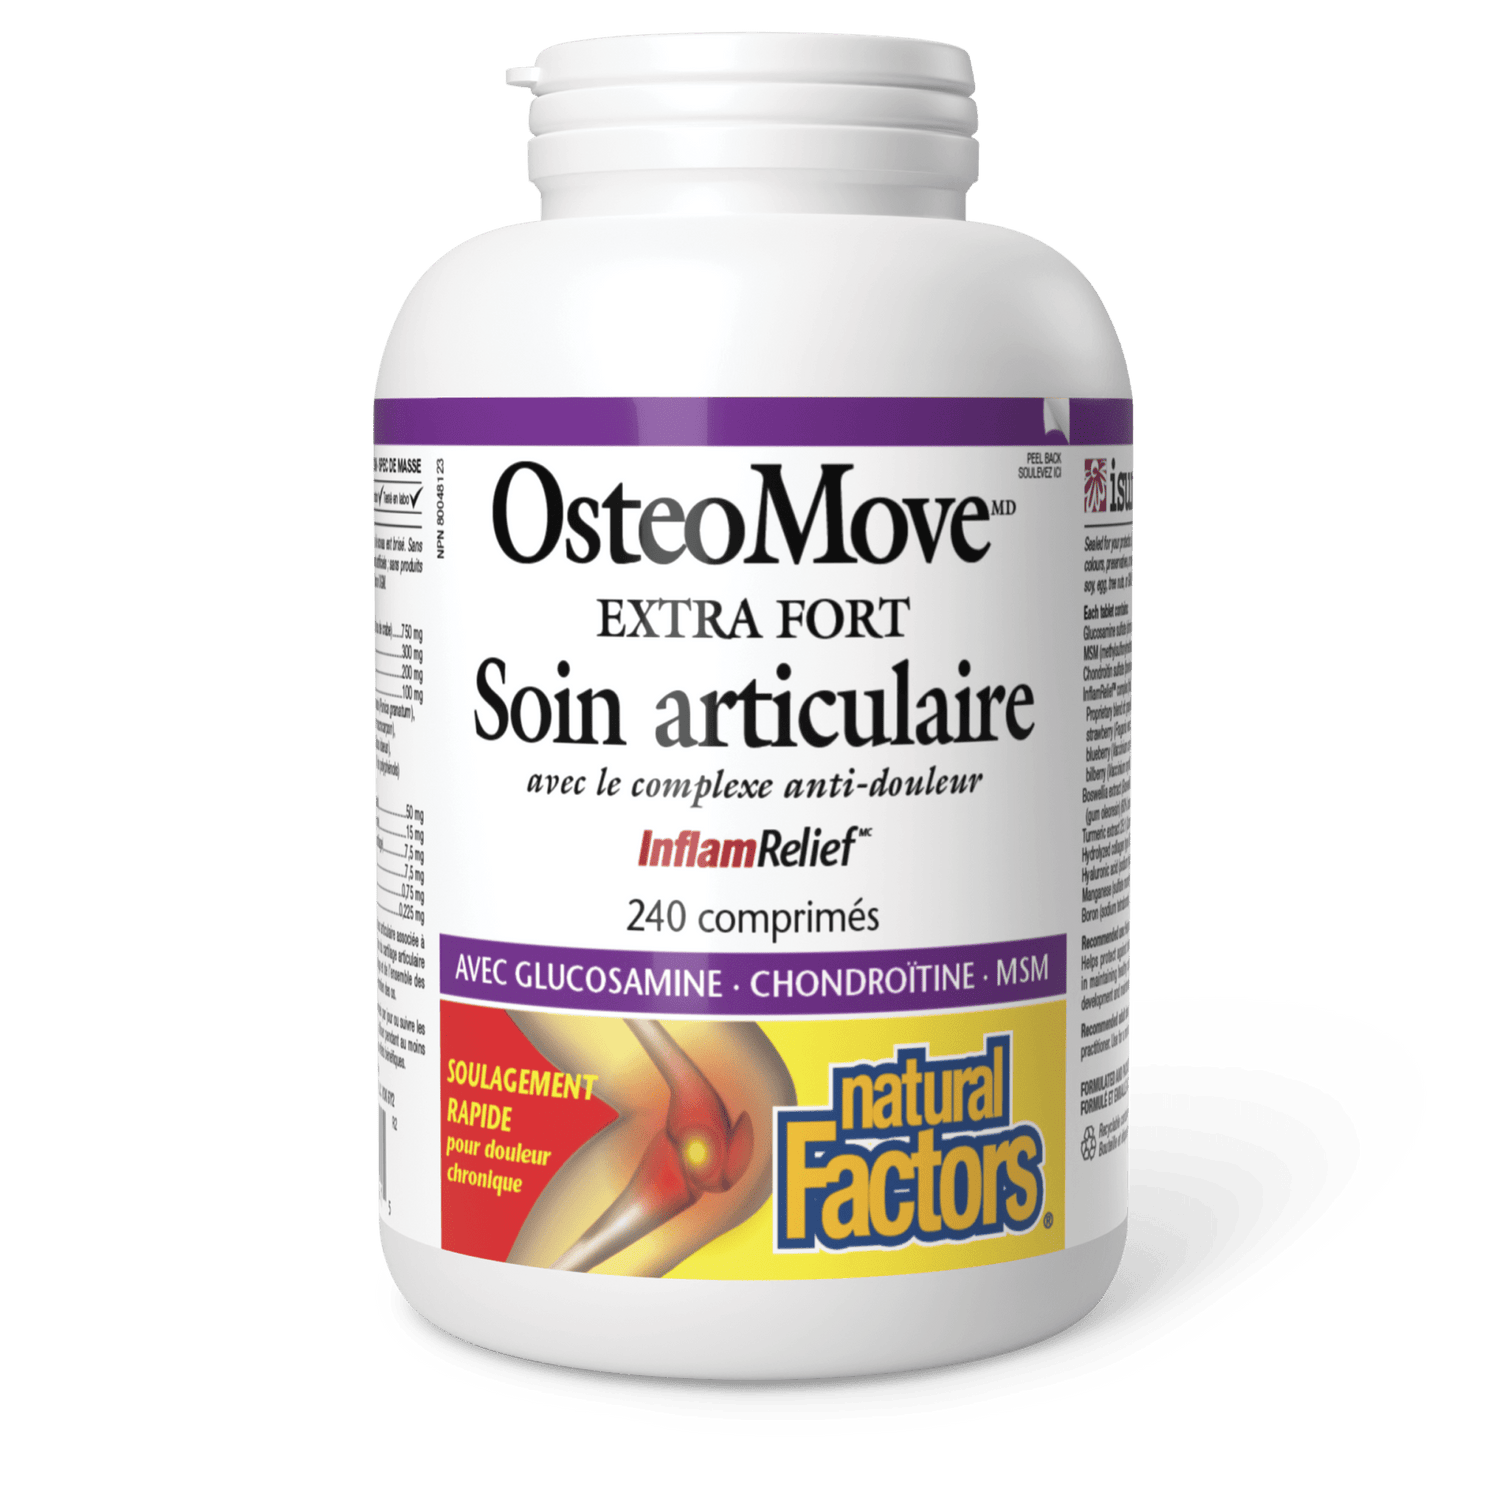 OsteoMove Extra fort Soin articulaire, Natural Factors|v|image|26841